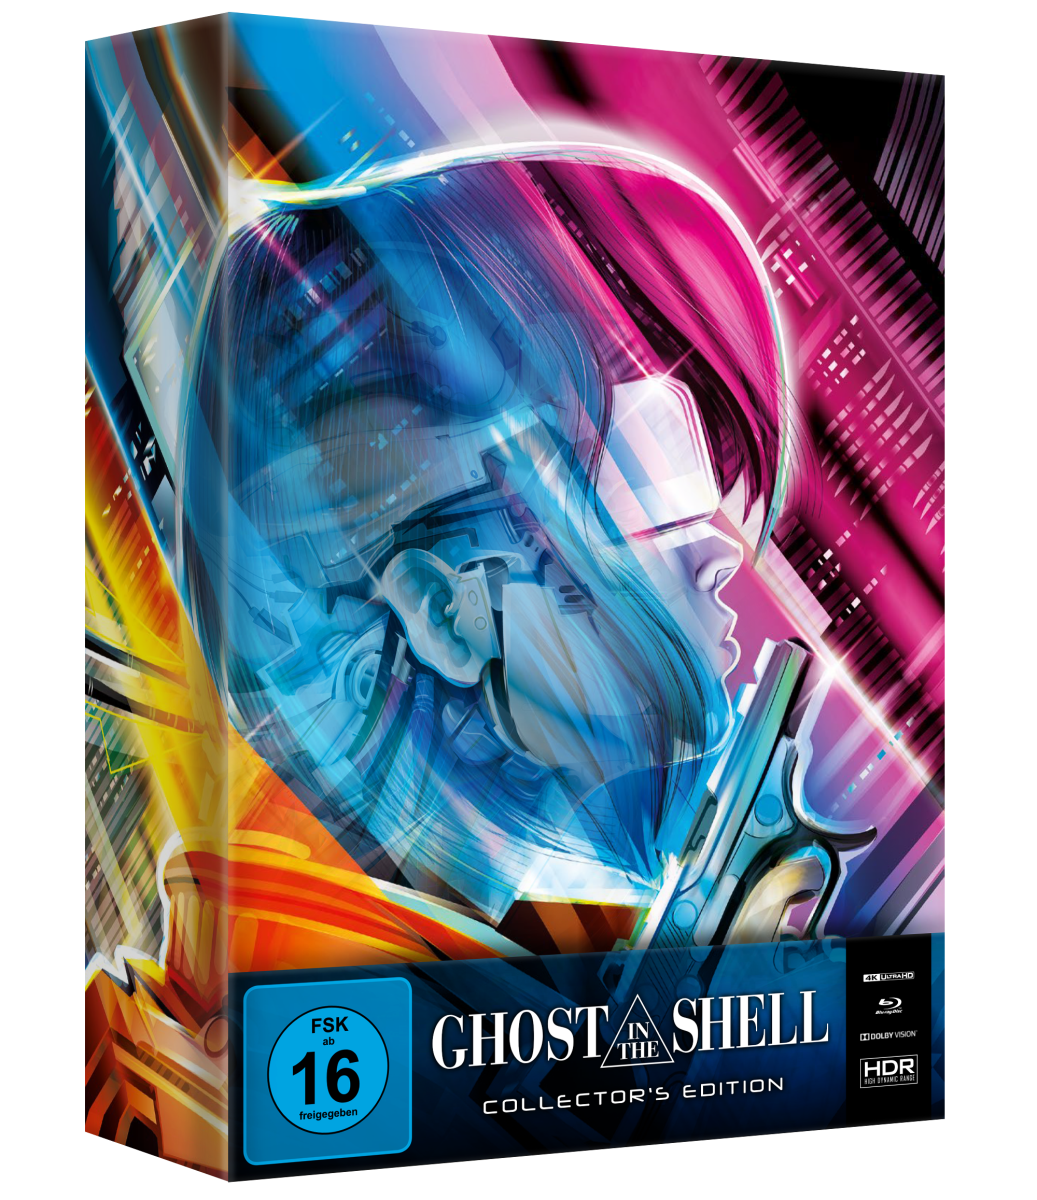 Ghost in The Shell Collector's Edition [4K UHD + 4 Discs] Image 2